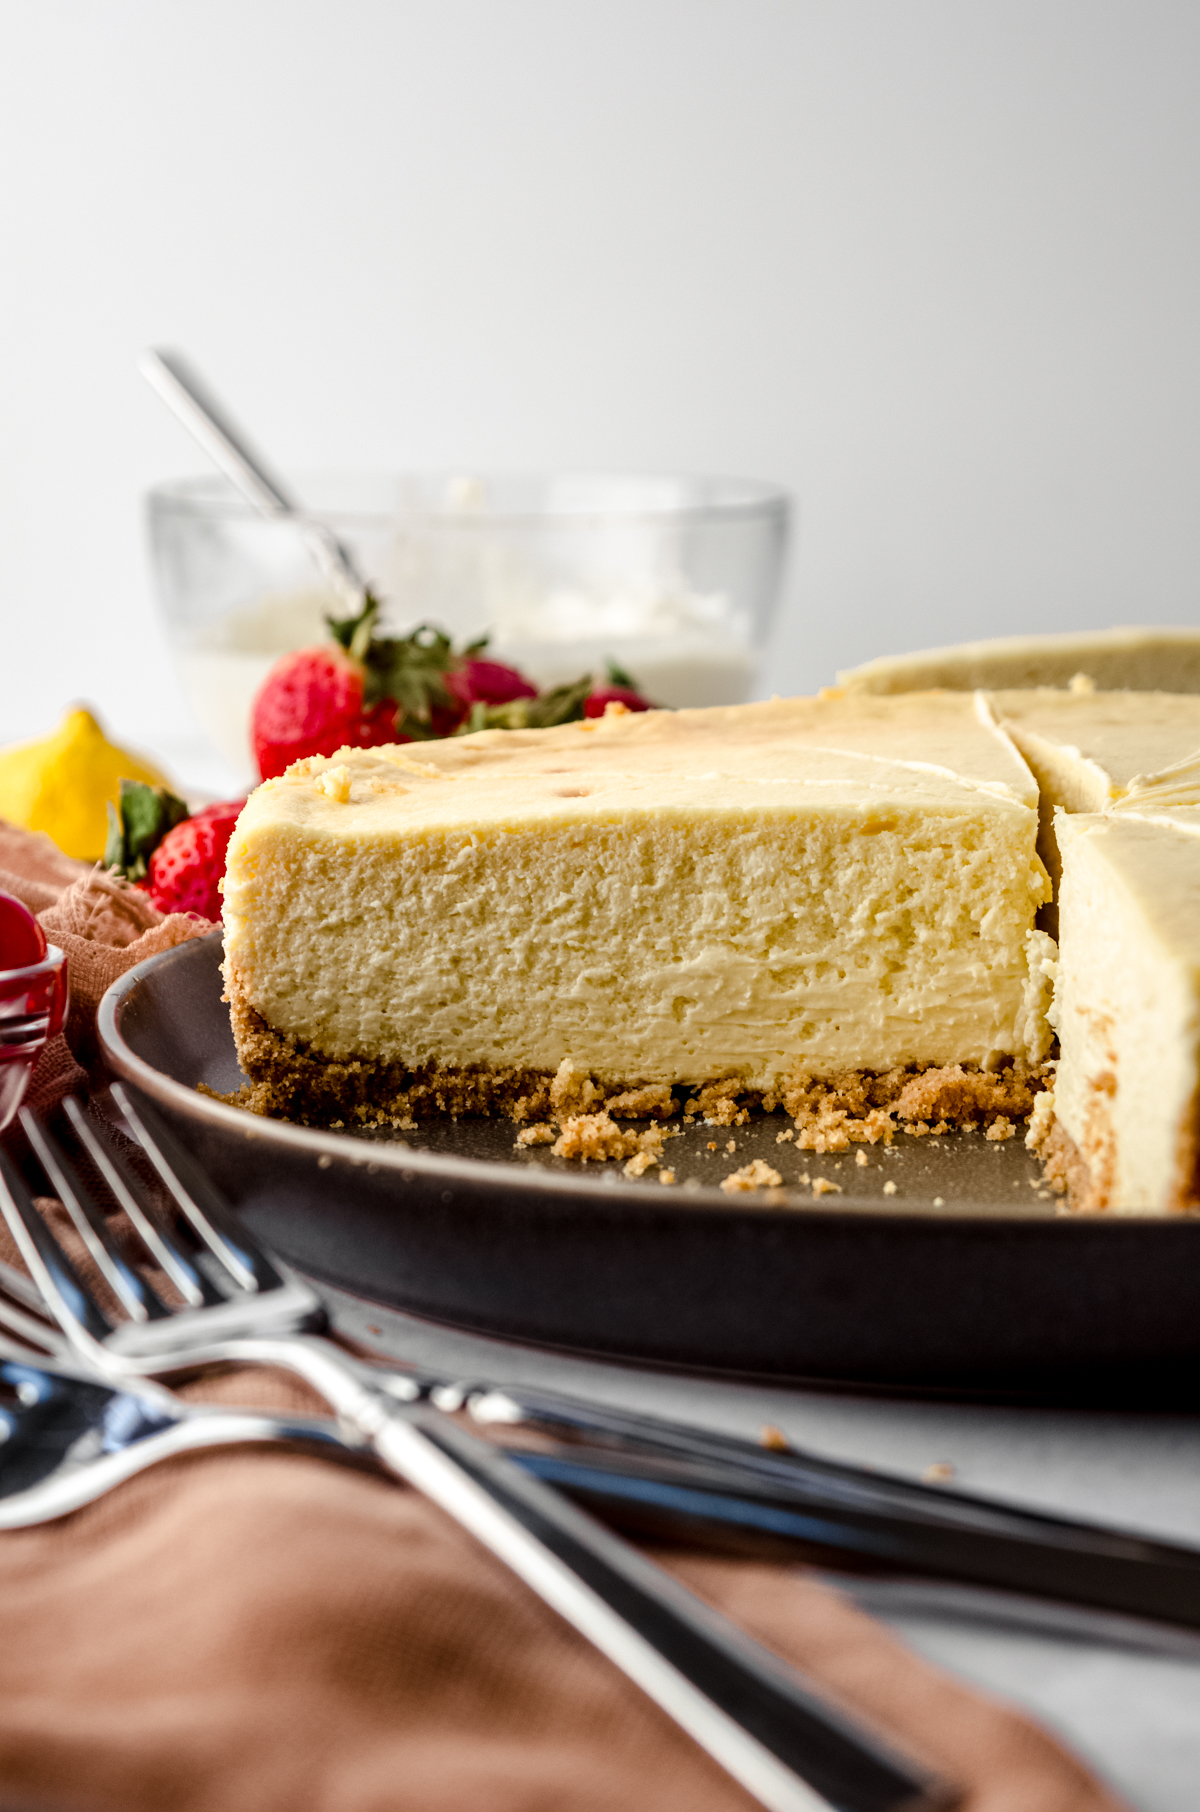 A classic cheesecake on a plate. It has been sliced so you can see the cross-section of the cheesecake.